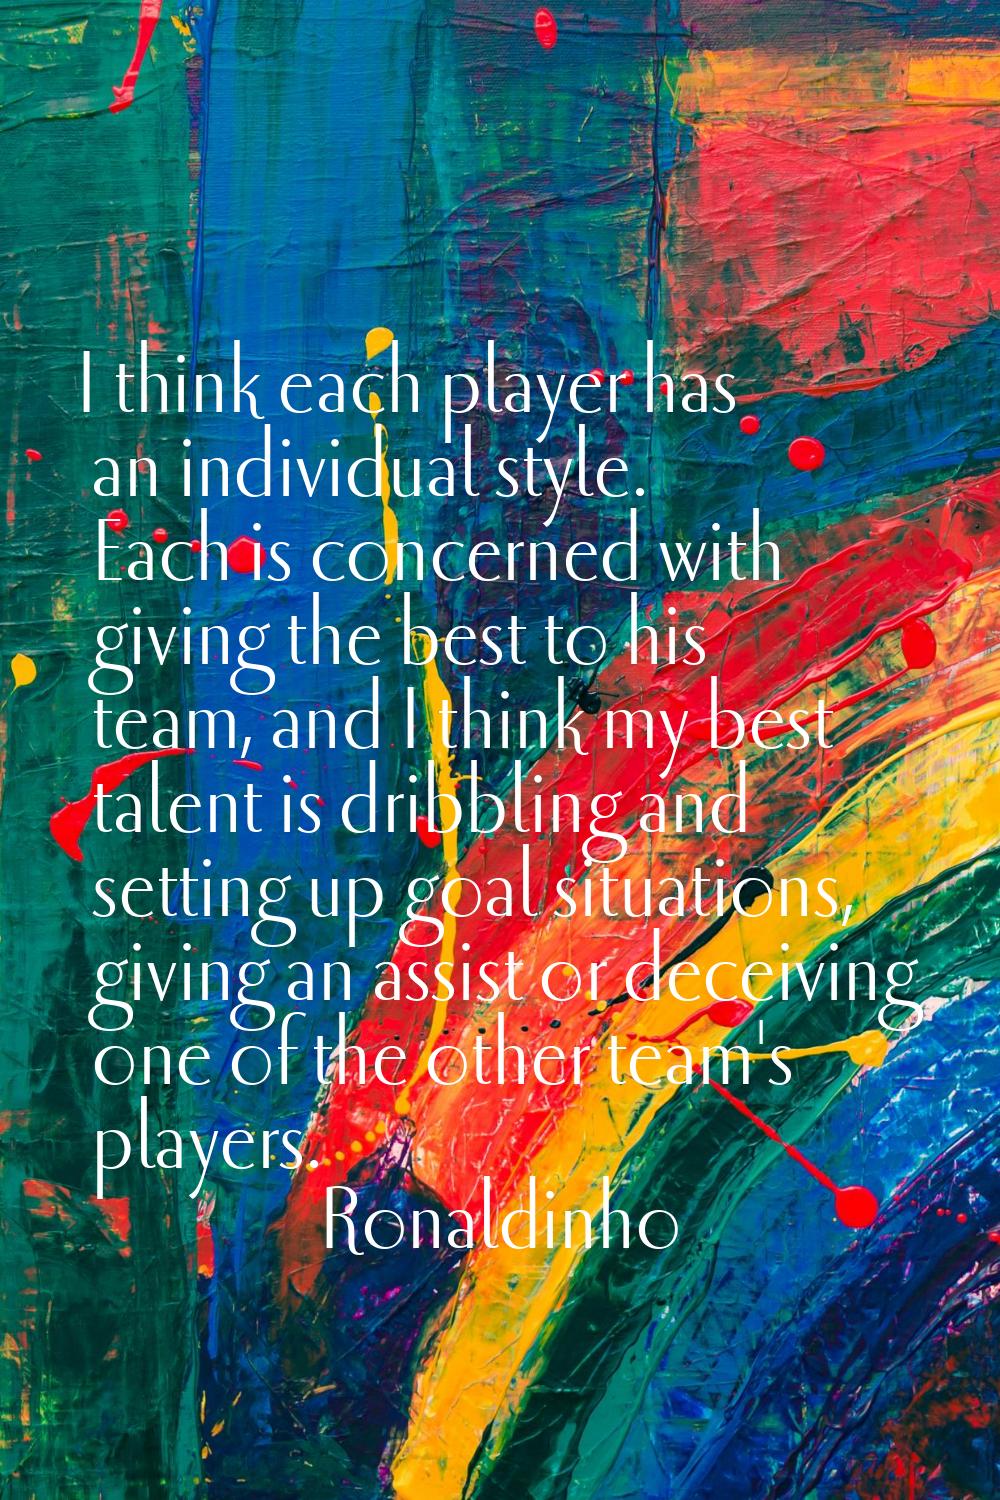 I think each player has an individual style. Each is concerned with giving the best to his team, an